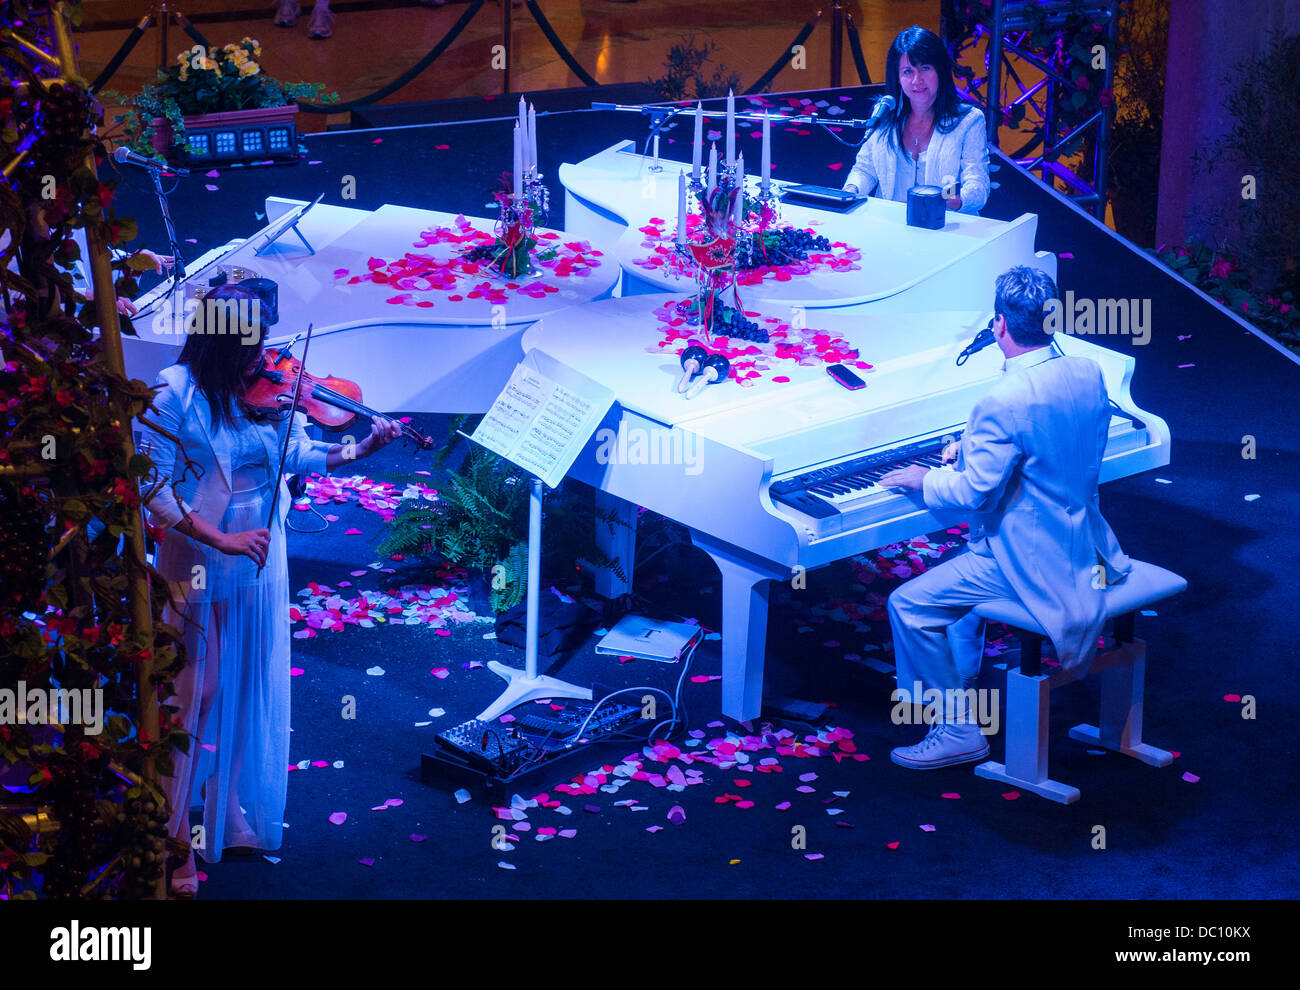 Pianists and a violinist perform at the Carnival experience festival in the Venetian Hotel in Las Vegas Stock Photo